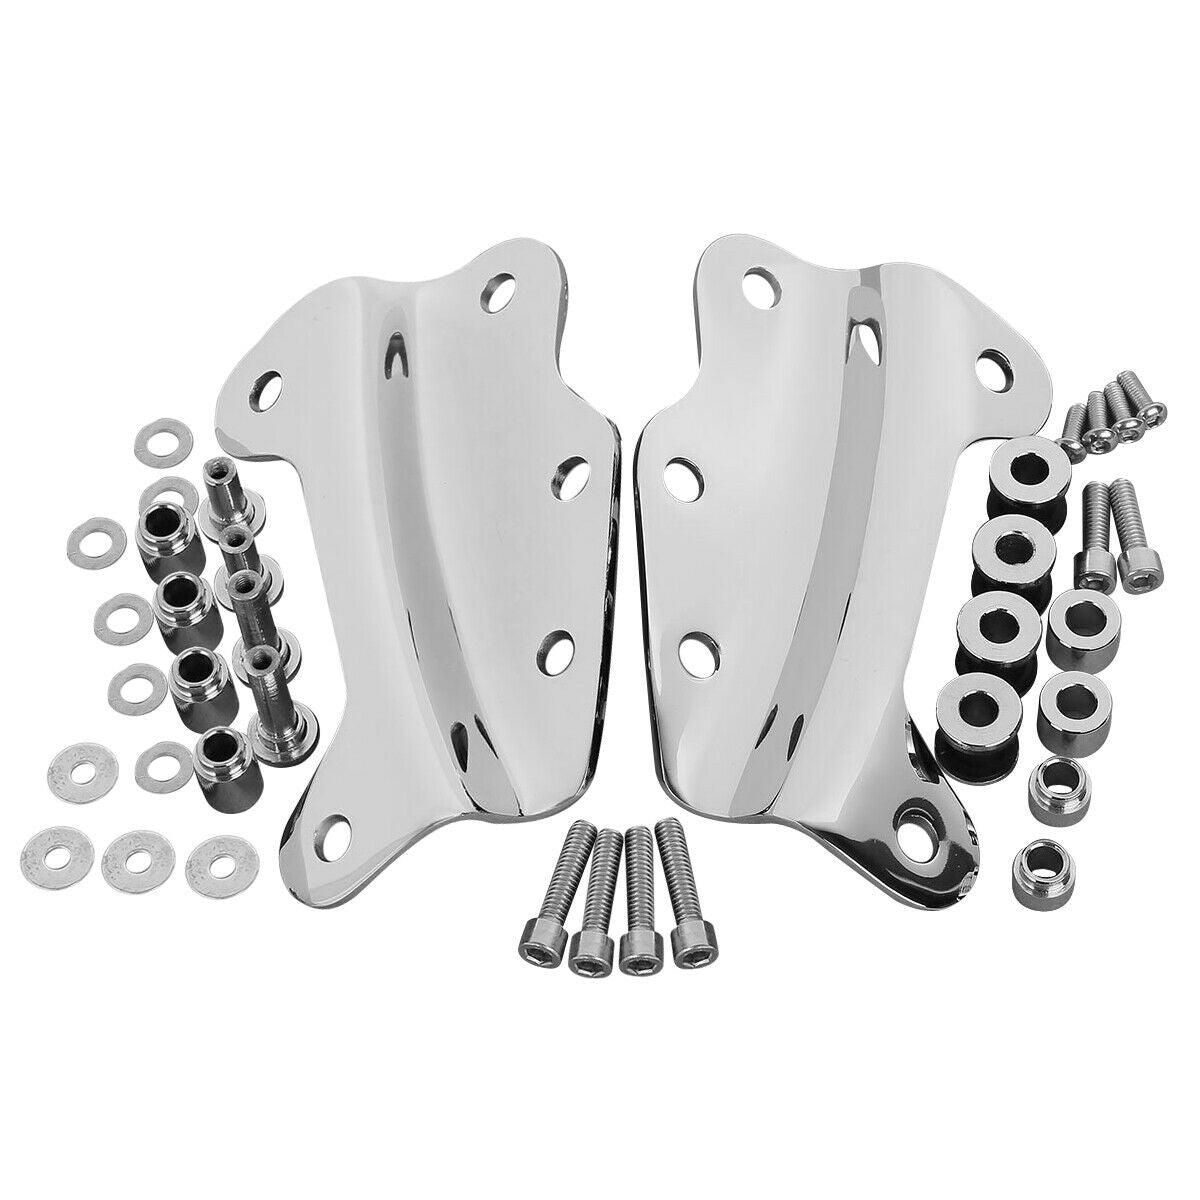 Chrome 4 Point Docking Hardware Kit Fit For Harley Touring Street Glide 09-13 US - Moto Life Products